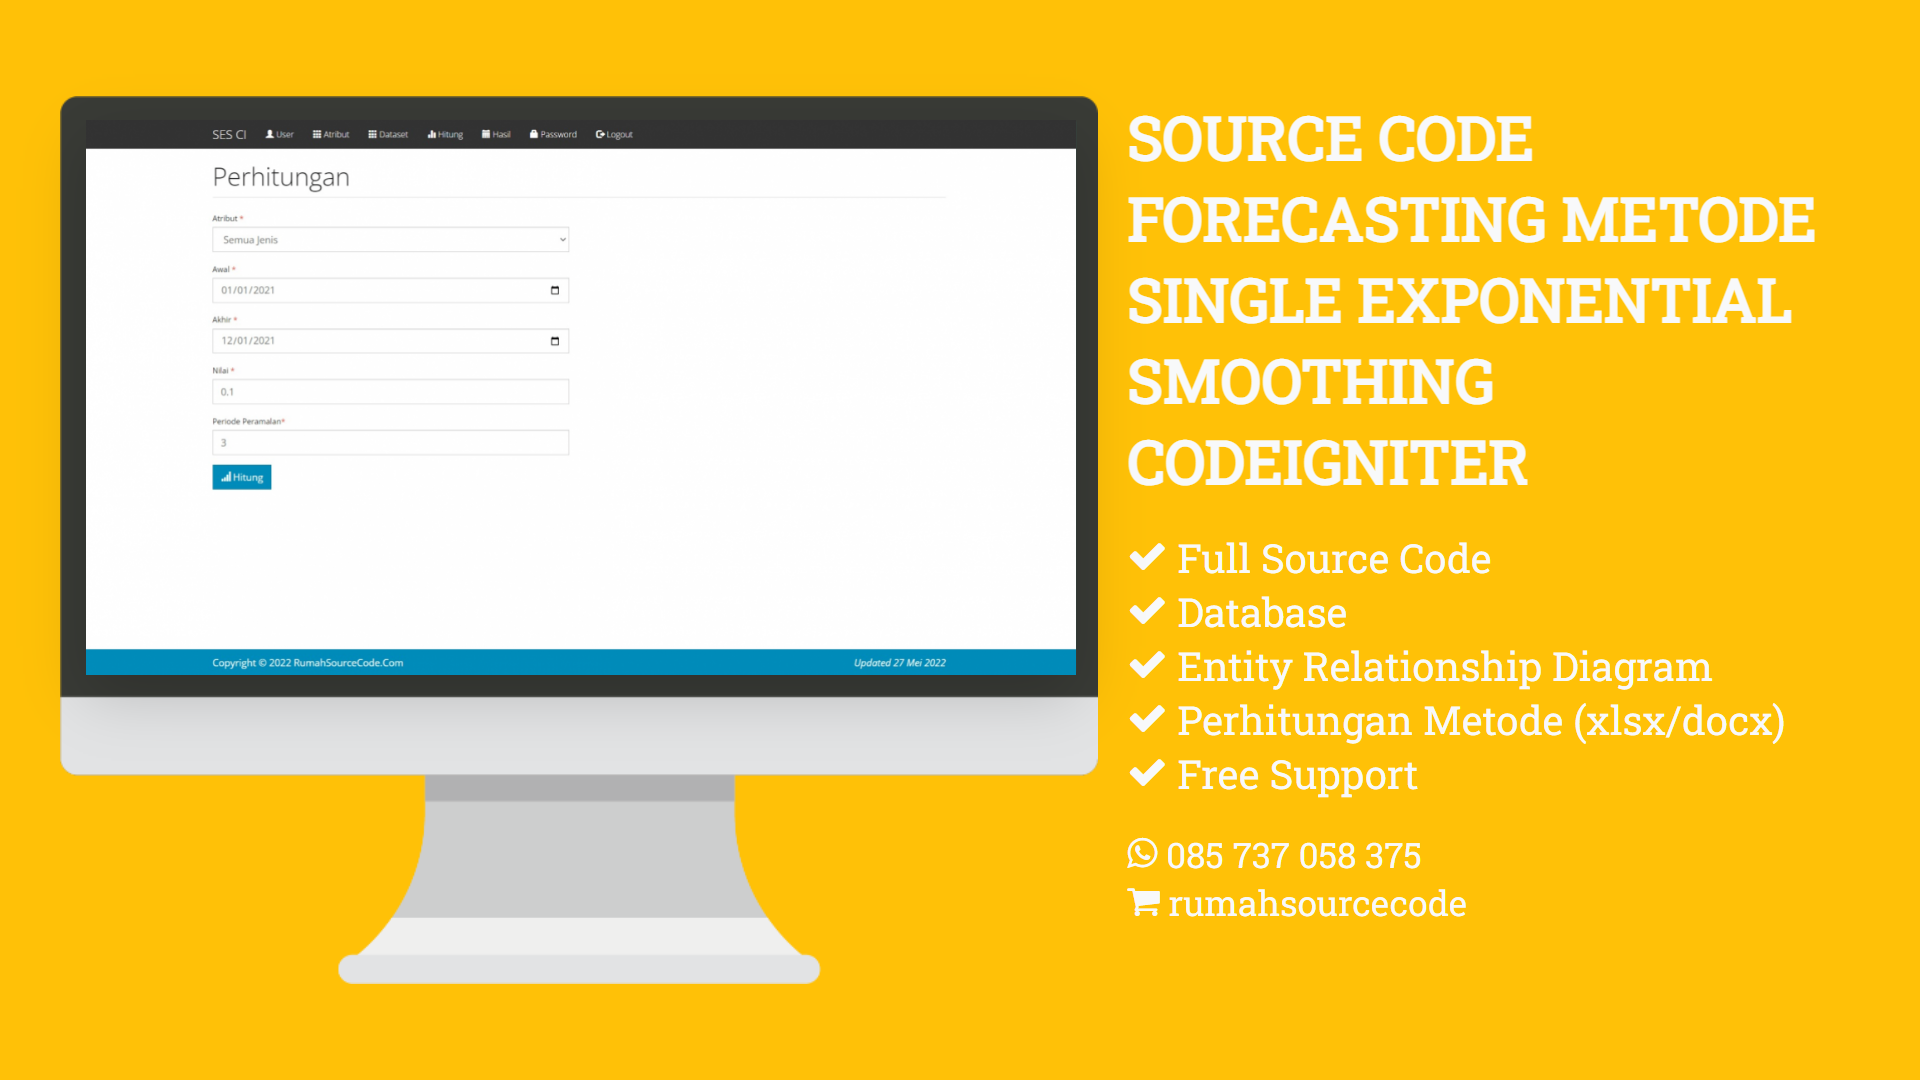 Source Code Forecasting Metode Single Exponential Smoothing Codeigniter